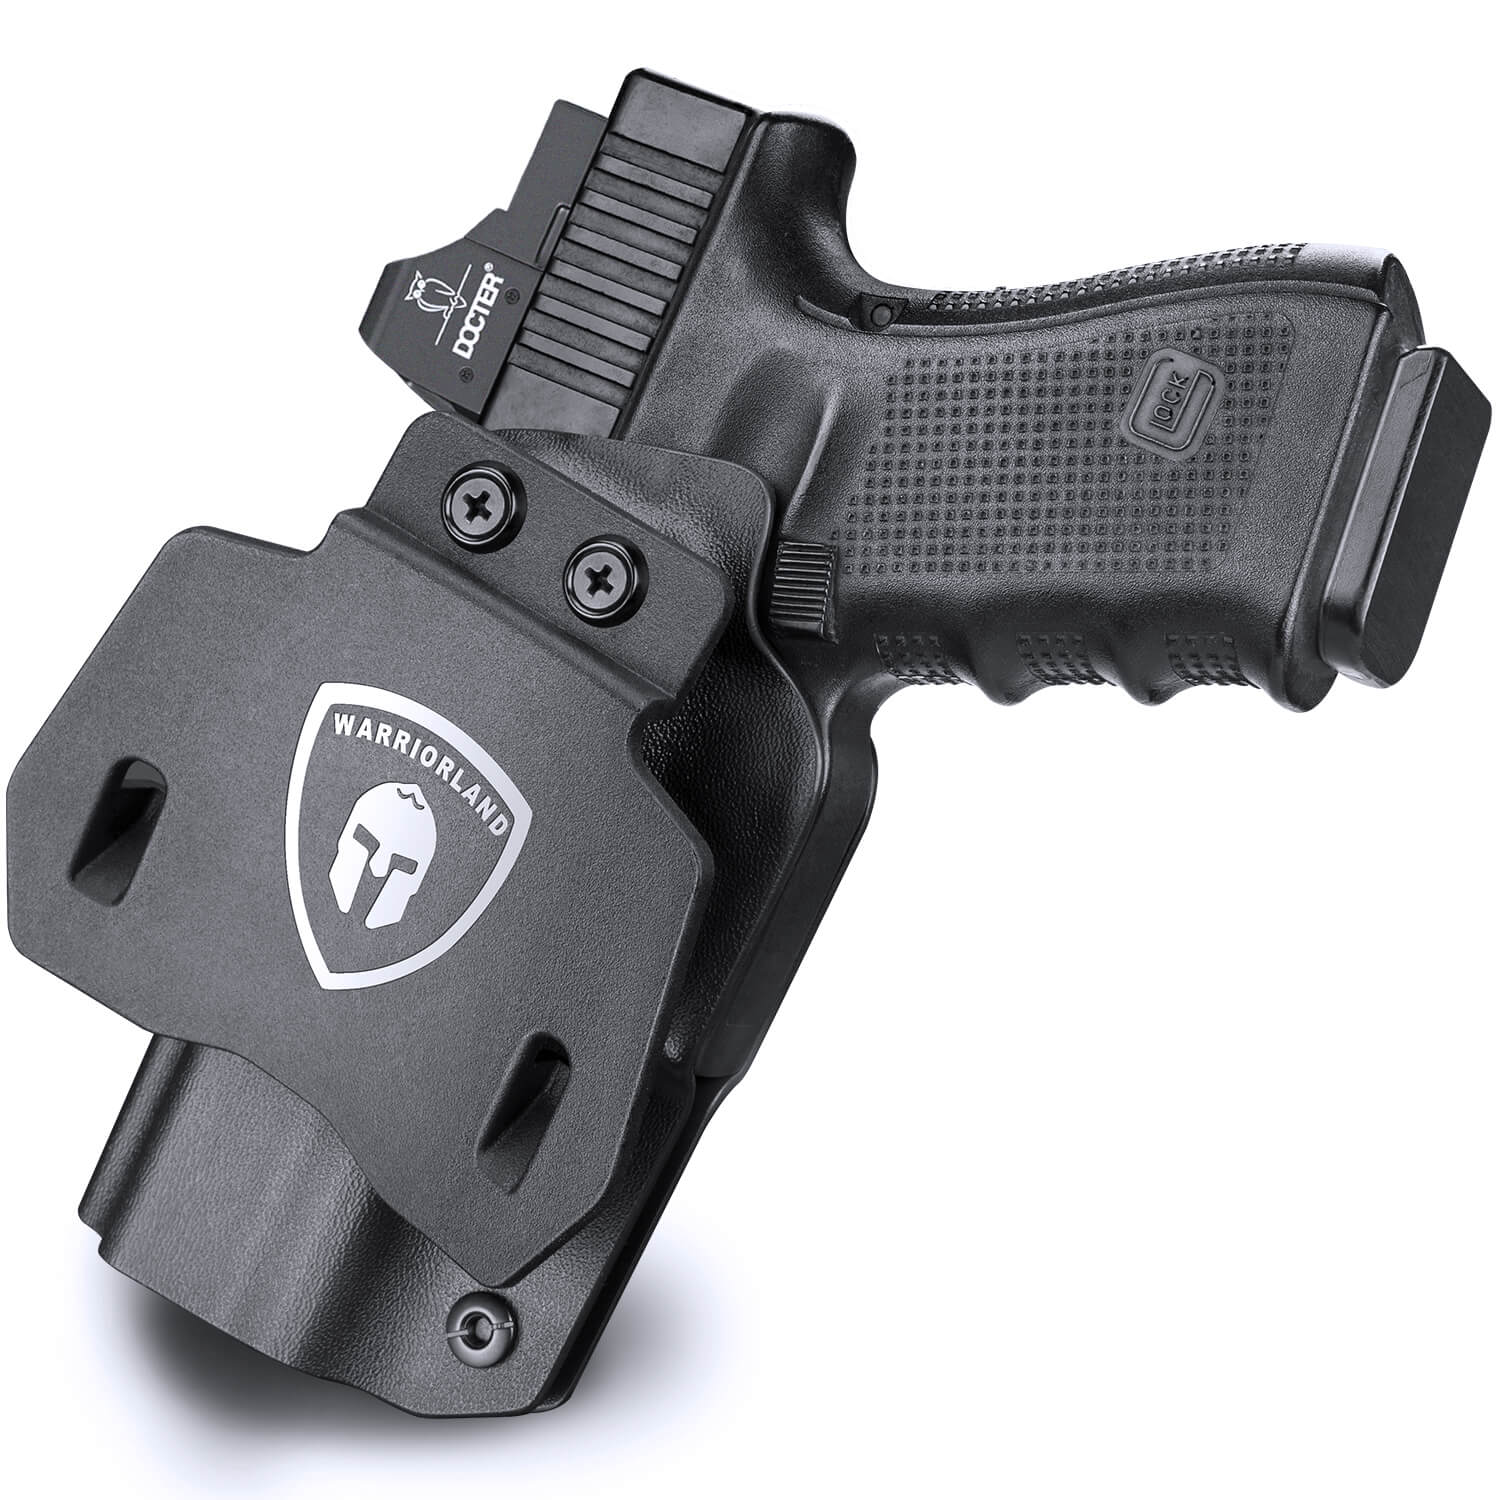 Holsters for your Glock pistols.